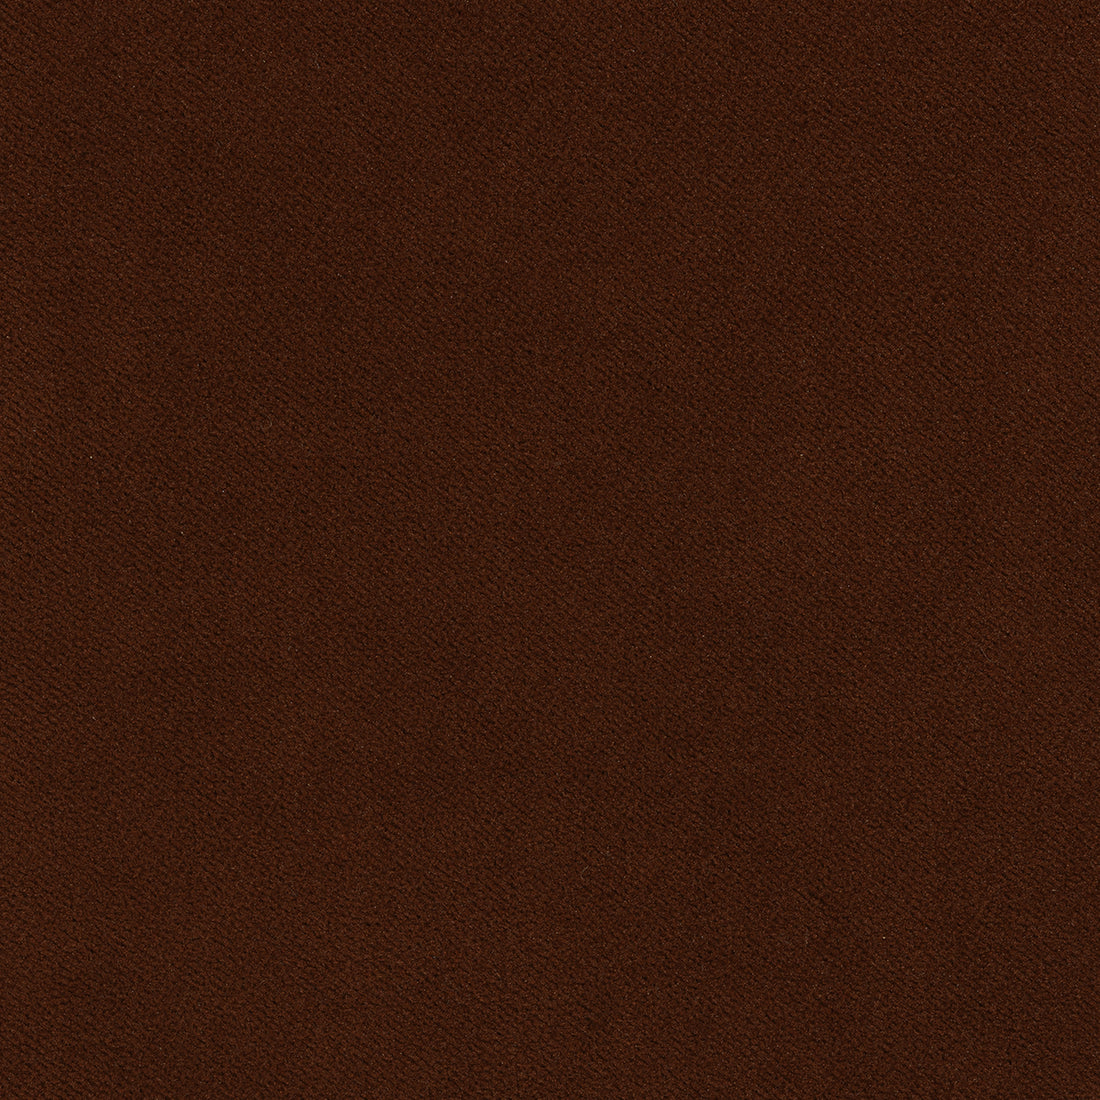 Club Velvet fabric in chocolate color - pattern number W7228 - by Thibaut in the Club Velvet collection